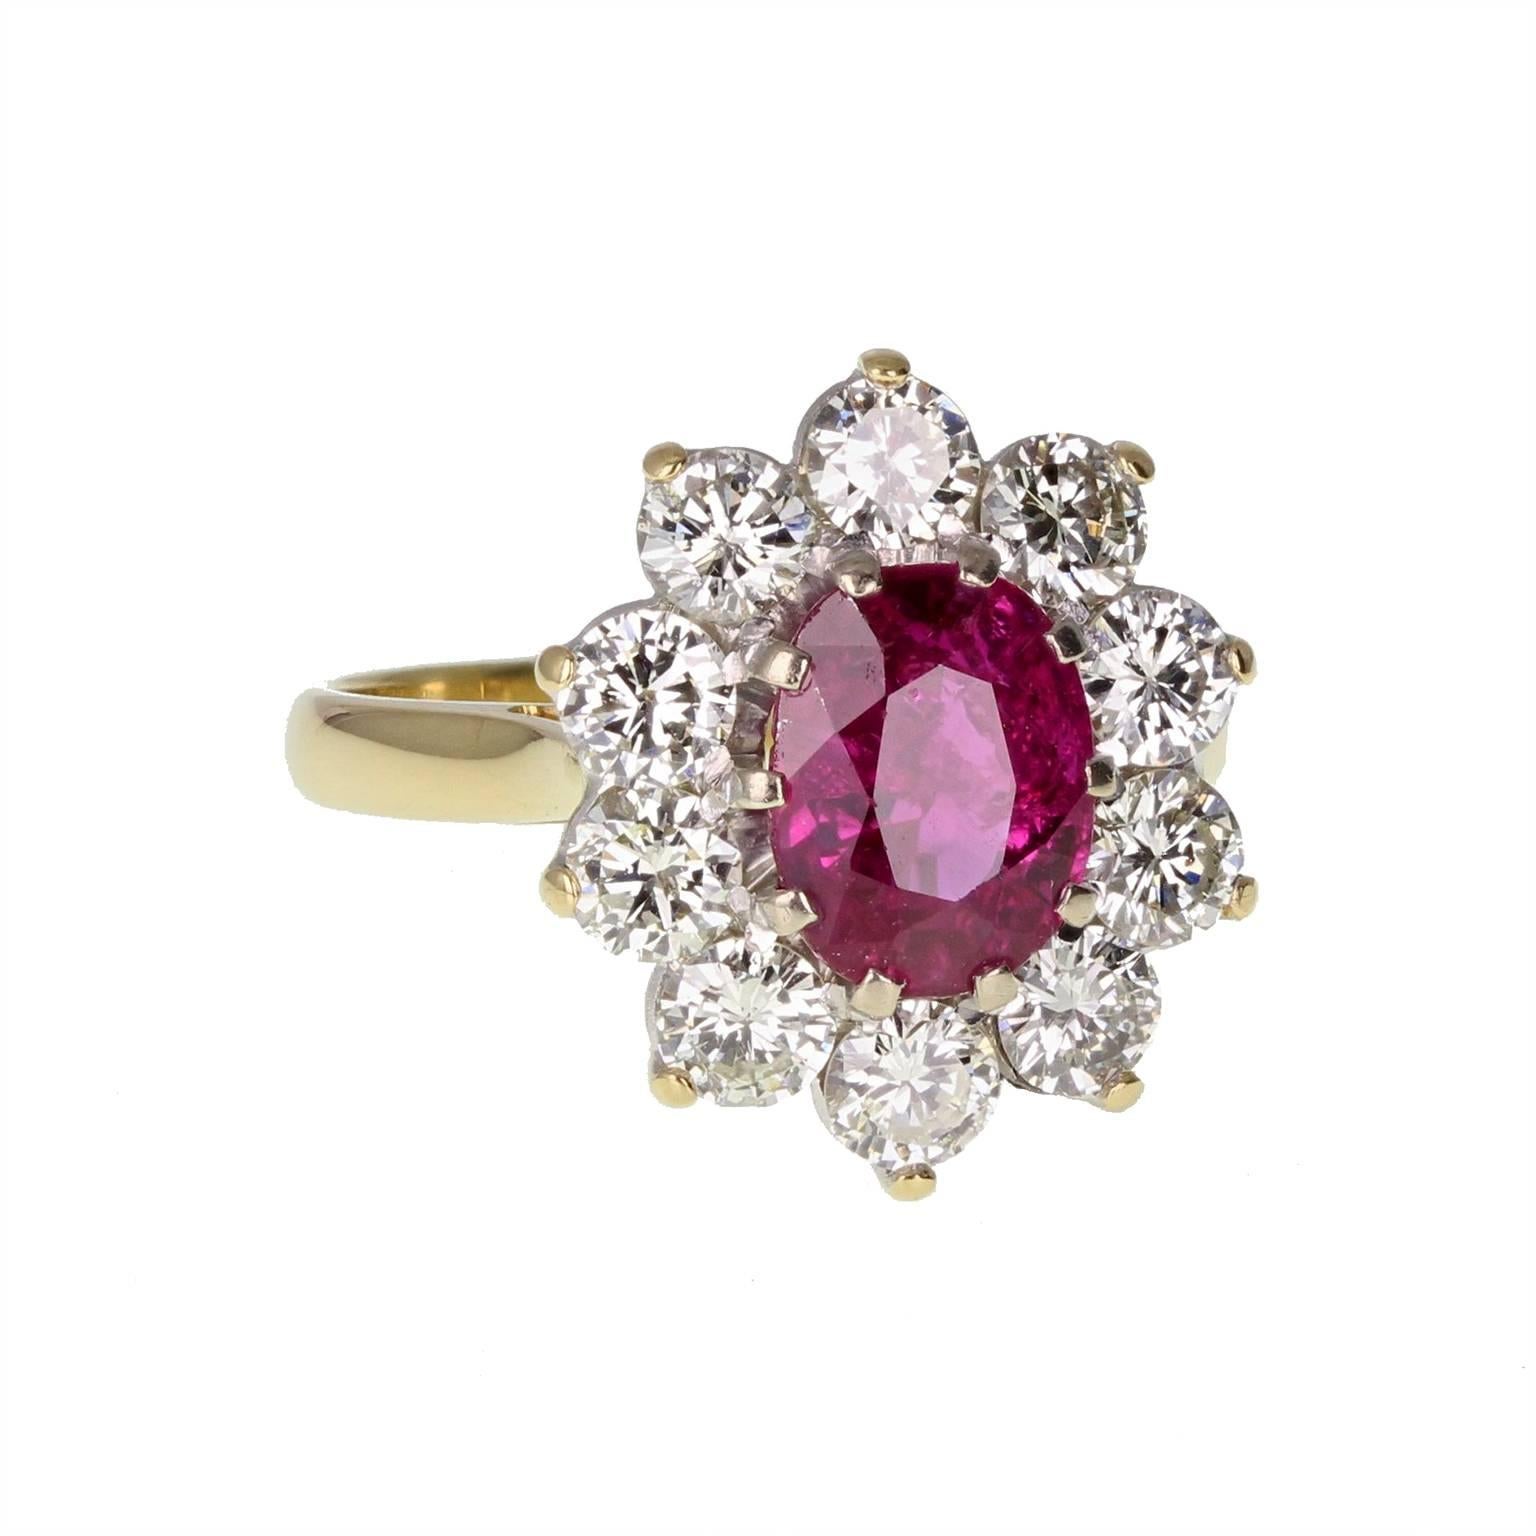 A fine, classic cluster ring featuring a central oval ruby weighing 2.40 carats, surrounded by ten brilliant-cut diamonds to form an oval shaped cluster. Claw set in a traditional basket setting. Simple and elegant, with a fine polished shank.